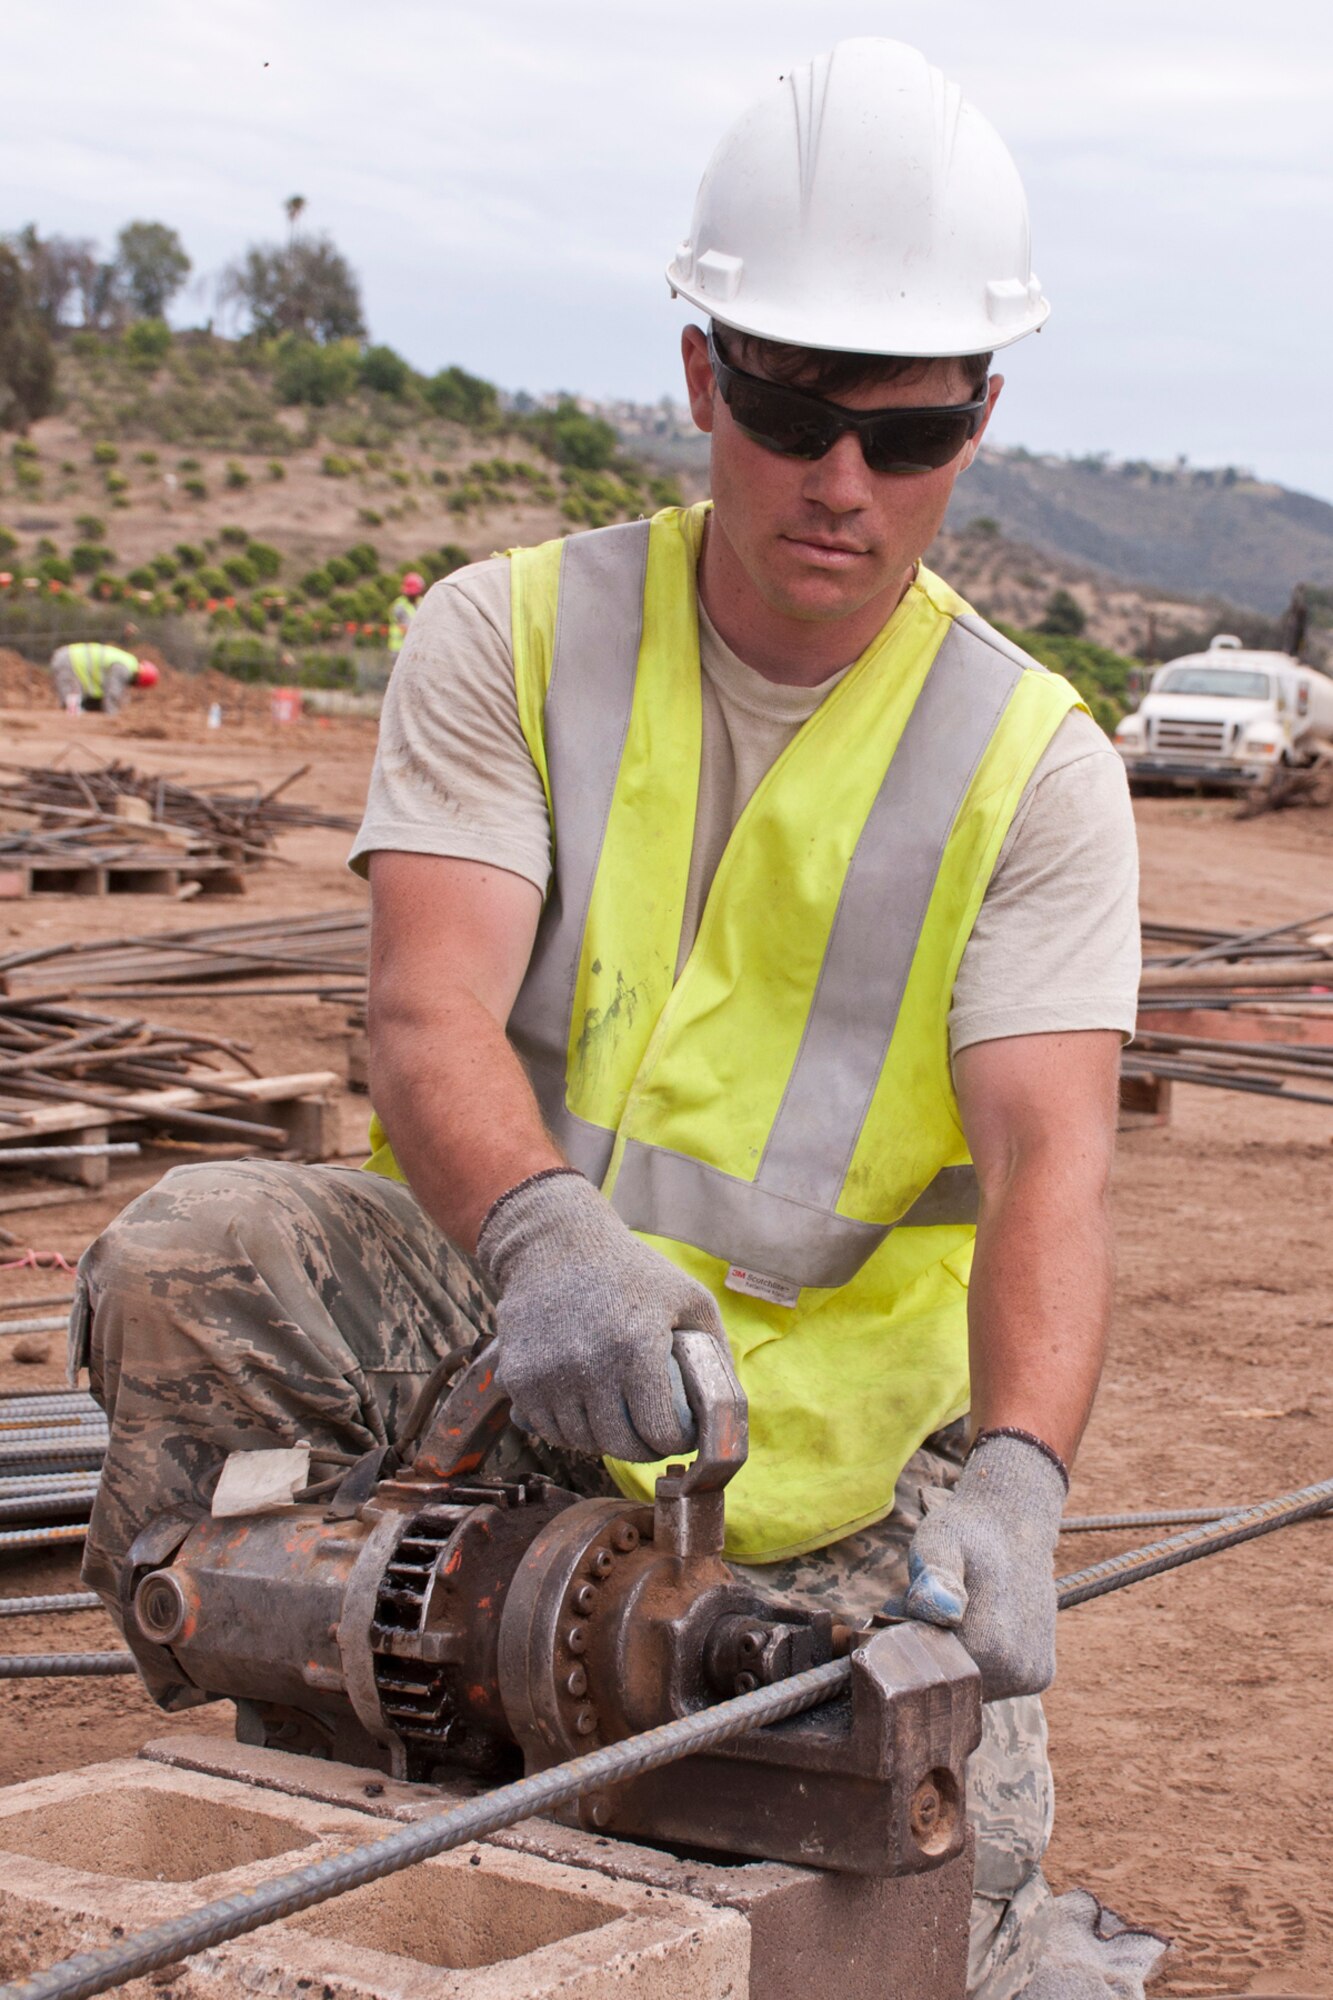 U.S. Air Force Senior Airman Trevor J. Wolfe, a structural journeyman assigned to the 583rd RED HORSE at Beale Air Force Base, Calif., cuts rebar for structural support in a perimeter wall being constructed in San Marcos, Calif., June 9, 2015. The project is for Training, Education, Research and Innovation (TERI) Inc., a non-profit organization dedicated to the education and assistance for children/adults with Autism and other special needs. (U.S. Air Force photo by Master Sgt. Jeff Walston)